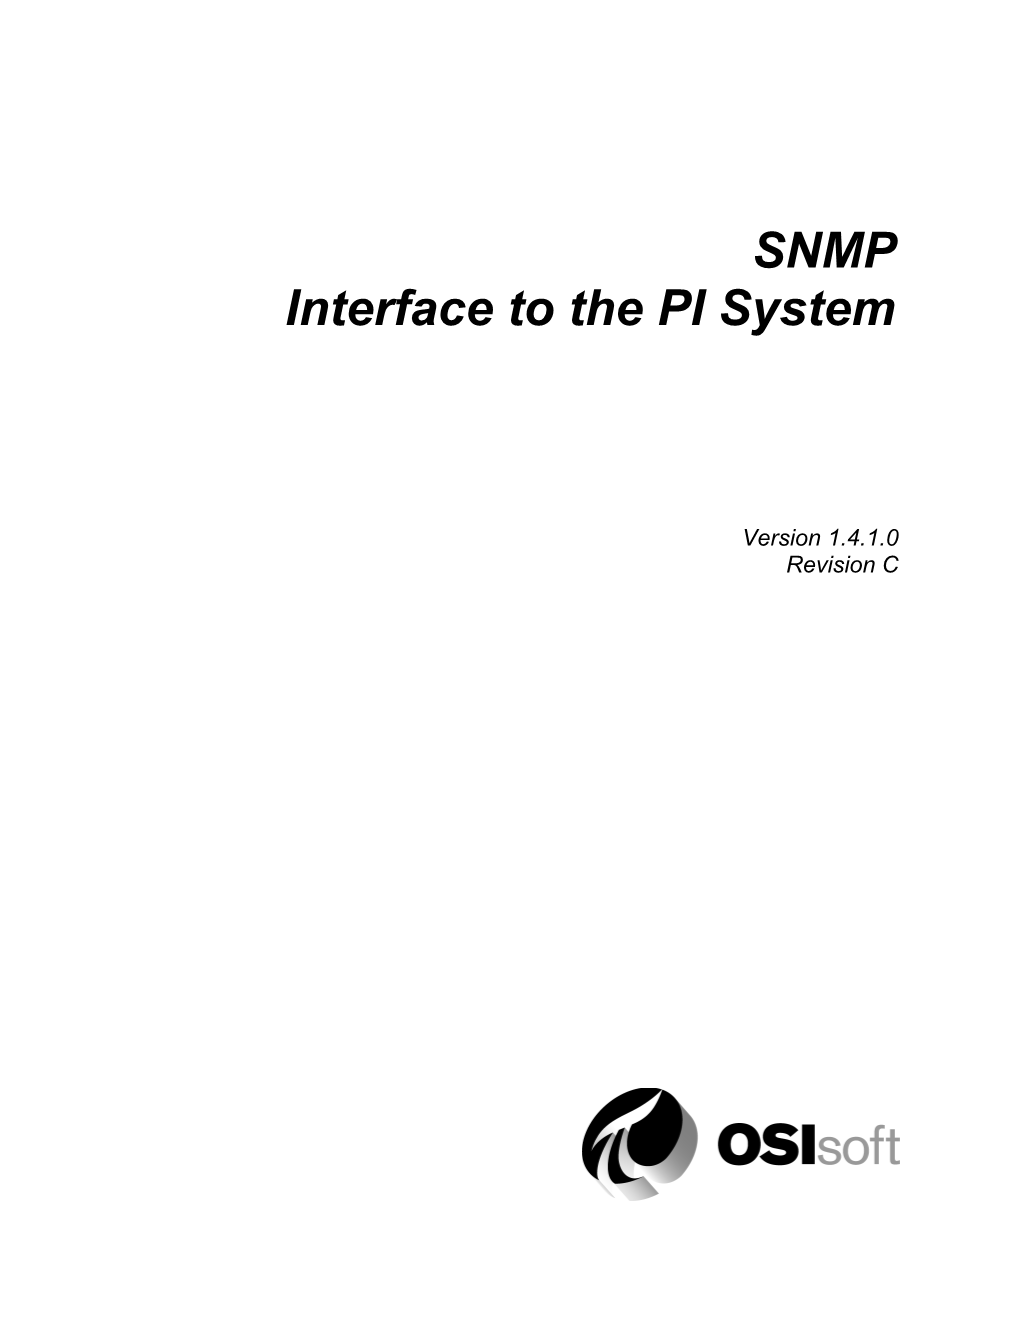 SNMP Interface to the PI System